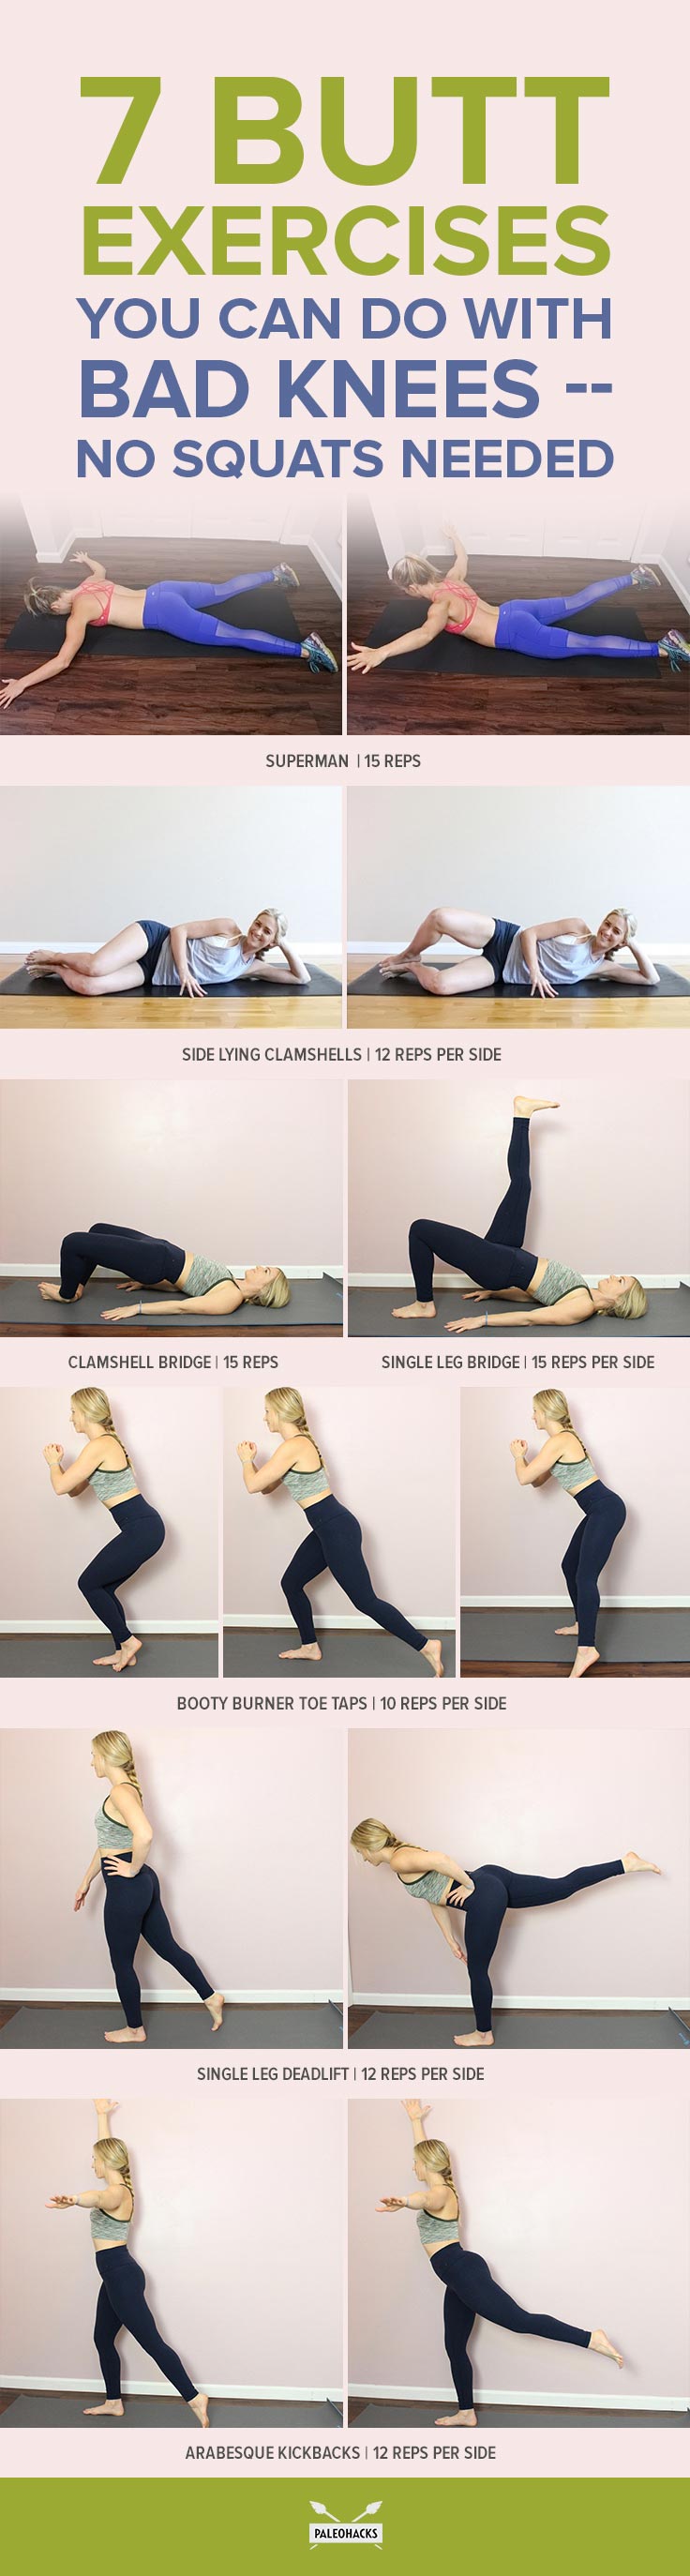 7 Butt Exercises You Can Do With Bad Knees - No Squats Needed-5652